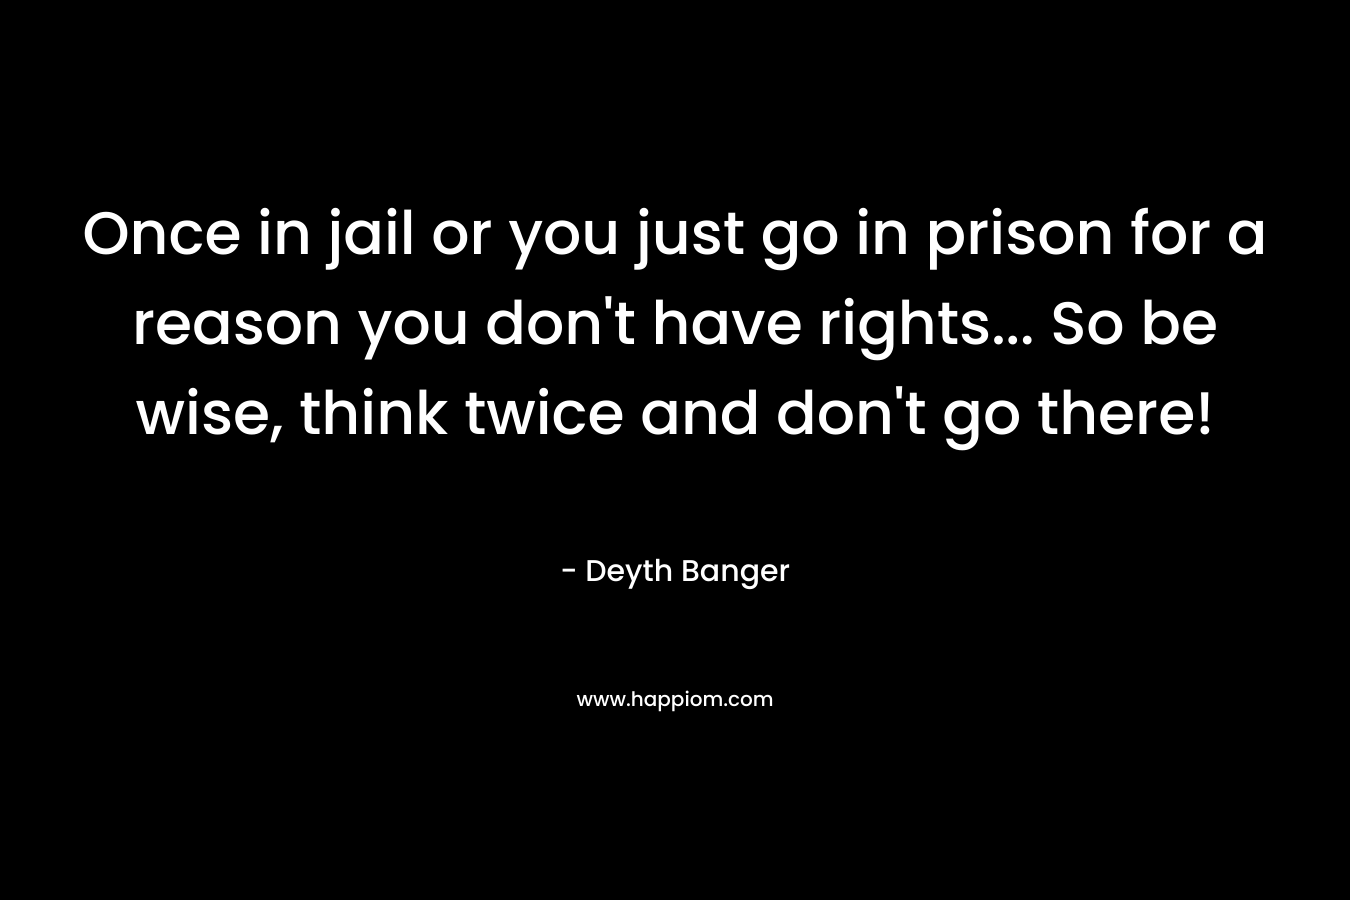 Once in jail or you just go in prison for a reason you don’t have rights… So be wise, think twice and don’t go there! – Deyth Banger